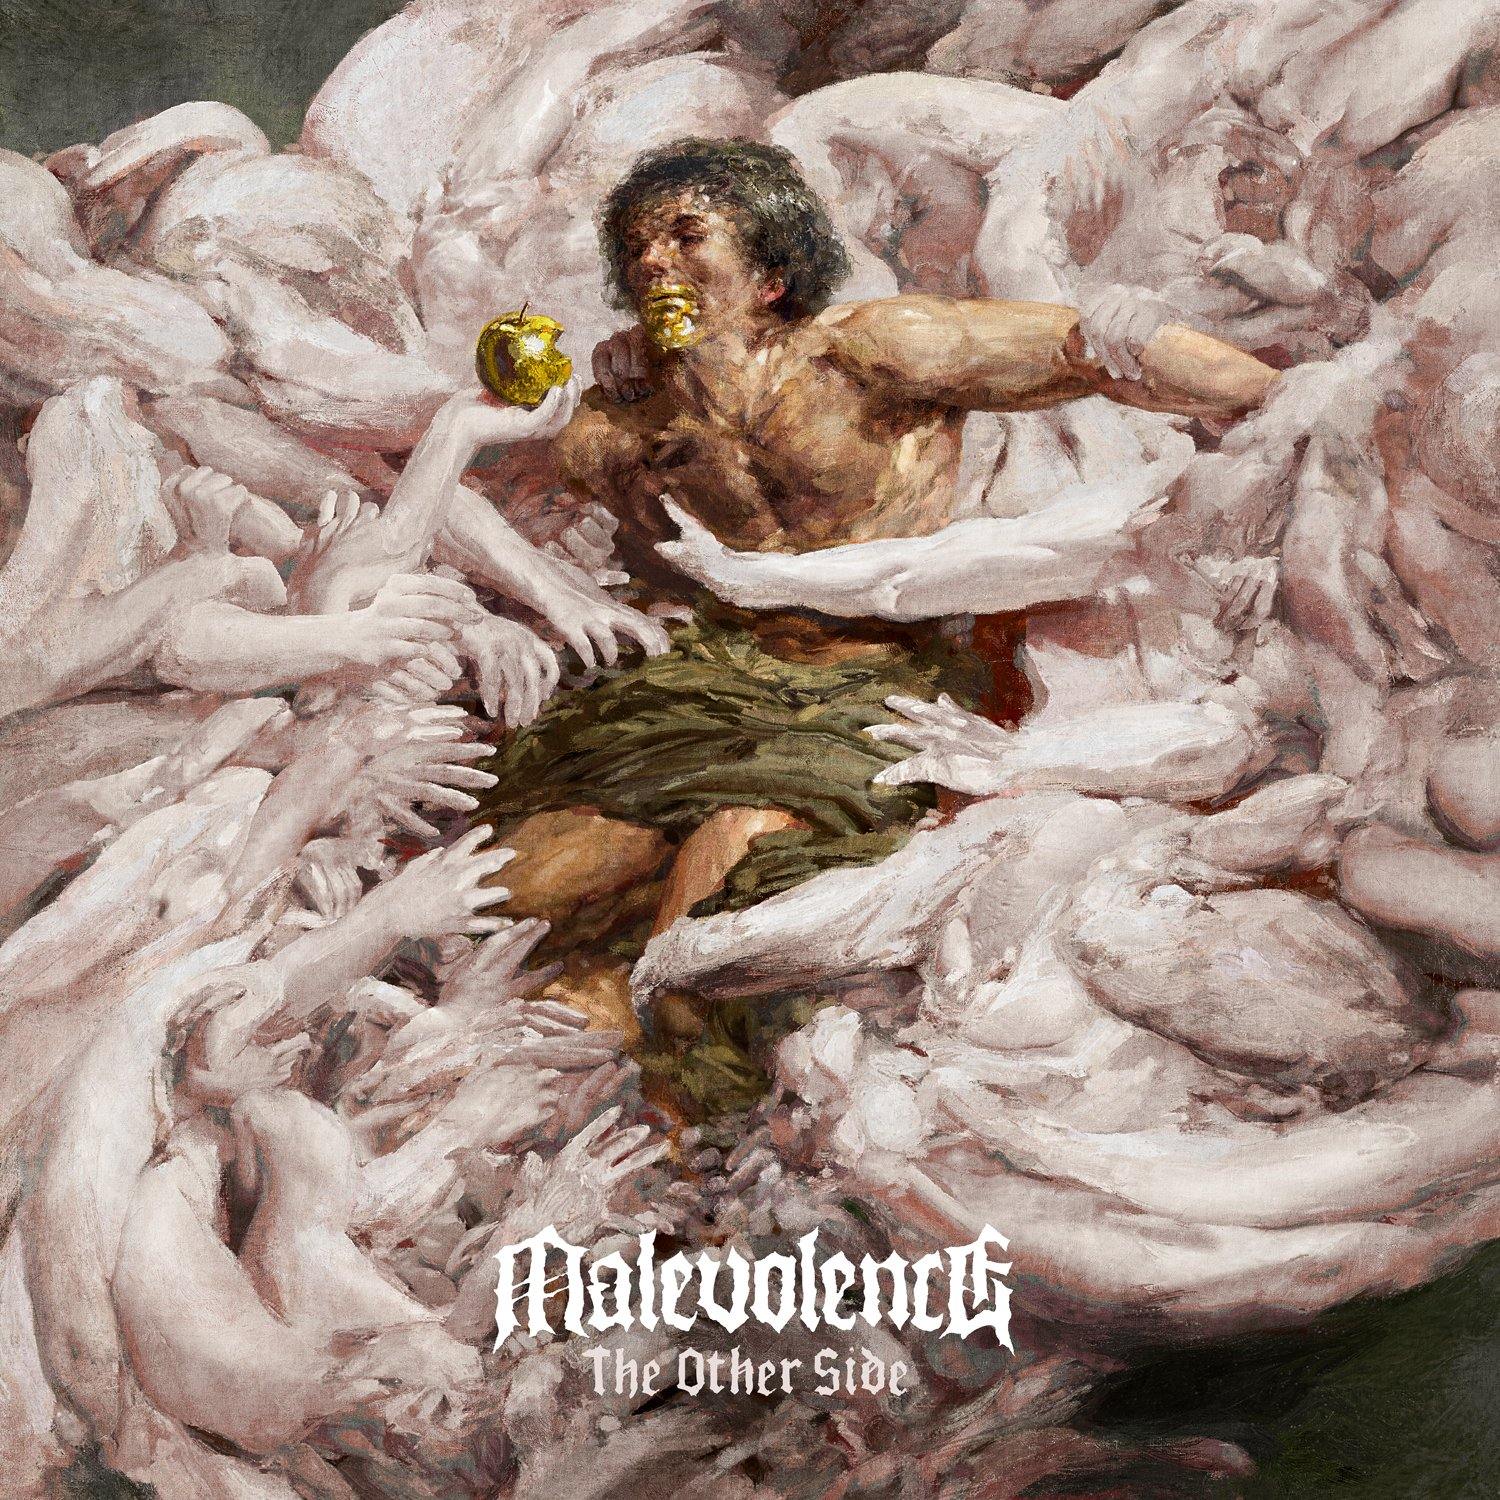 Buy – Malevolence "The Other Side" CD – Band & Music Merch – Cold Cuts Merch